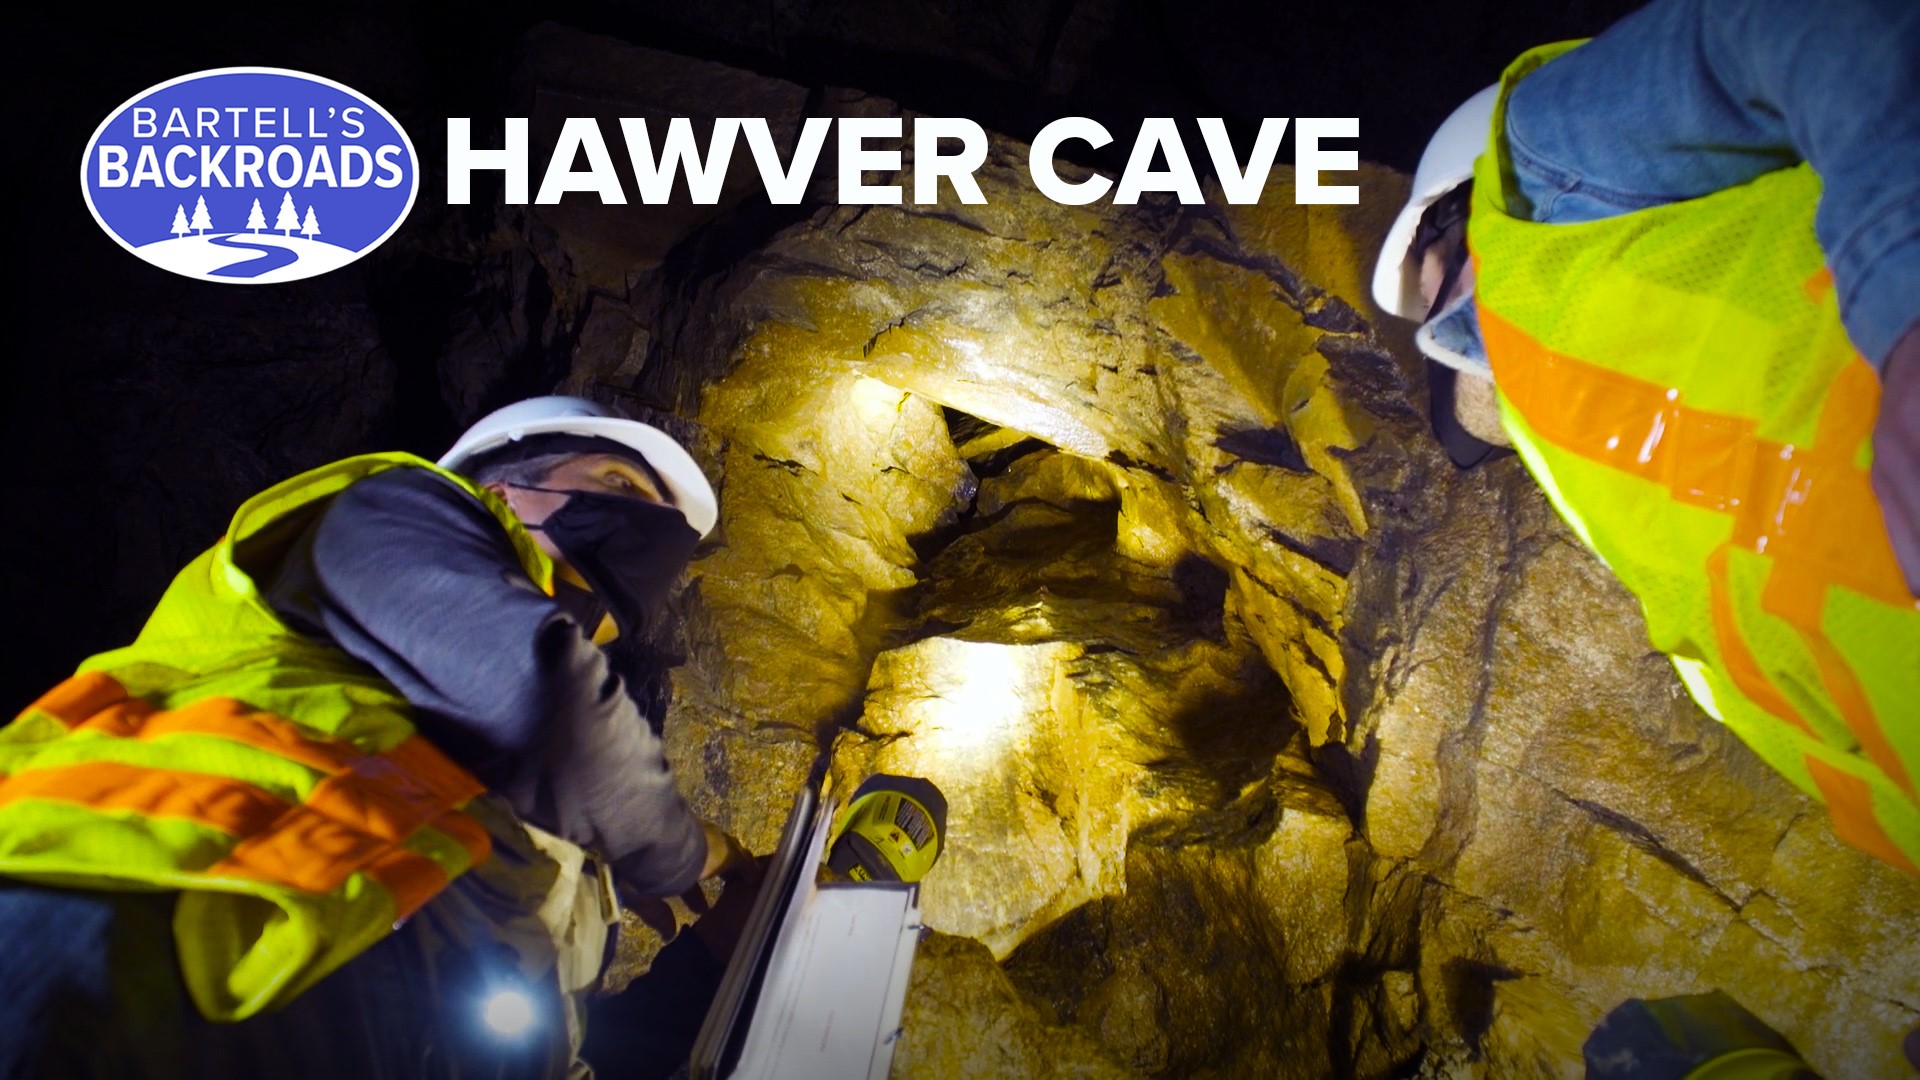 Before it was a limestone mine, the Mountain Quarries Mine Hawver Cave trapped animals from the Pleistocene era.